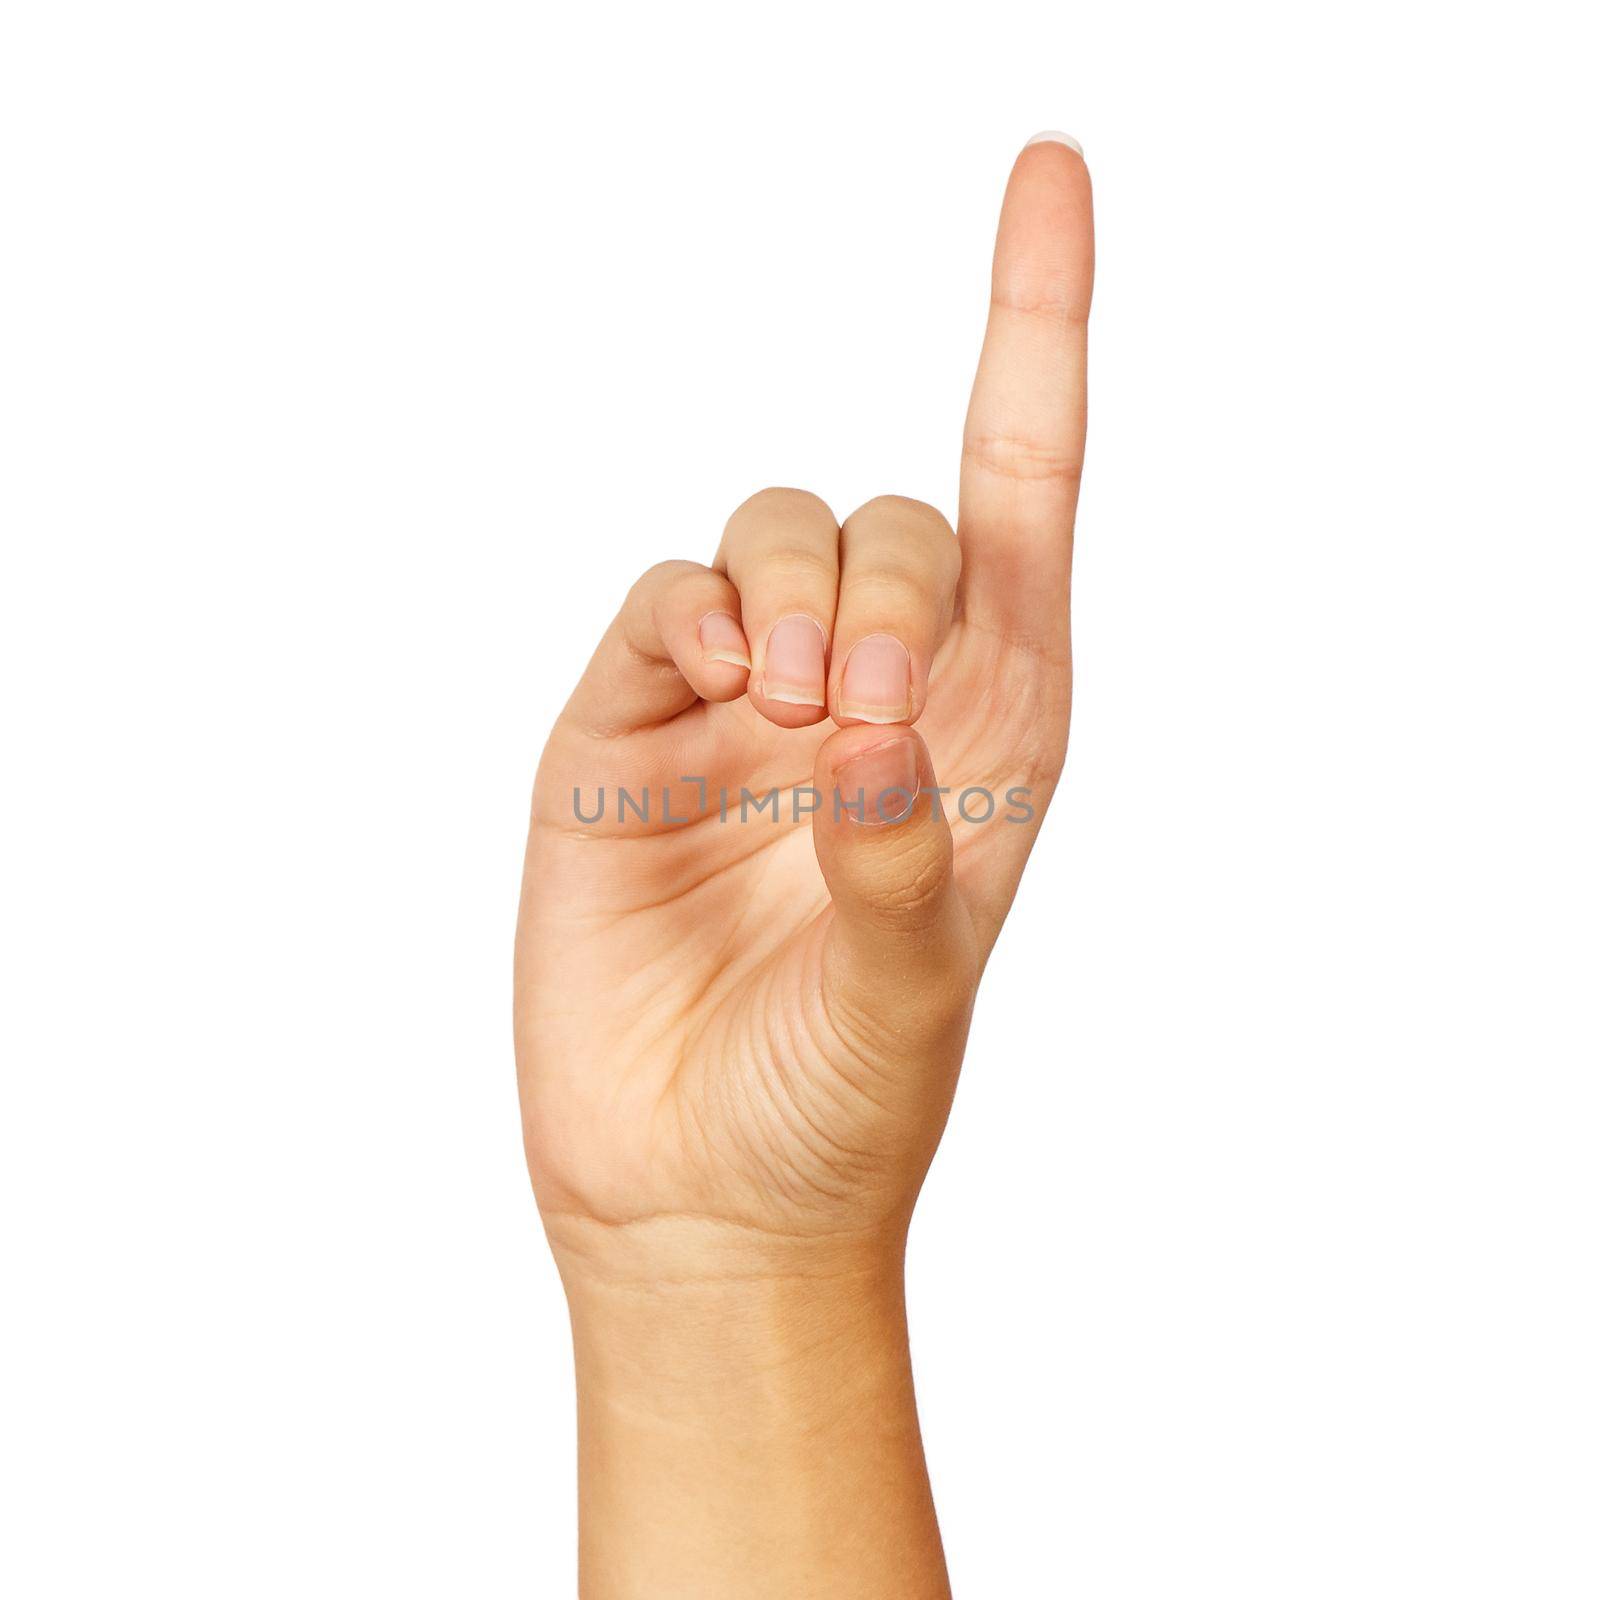 american sign language. female hand showing letter d by raddnatt